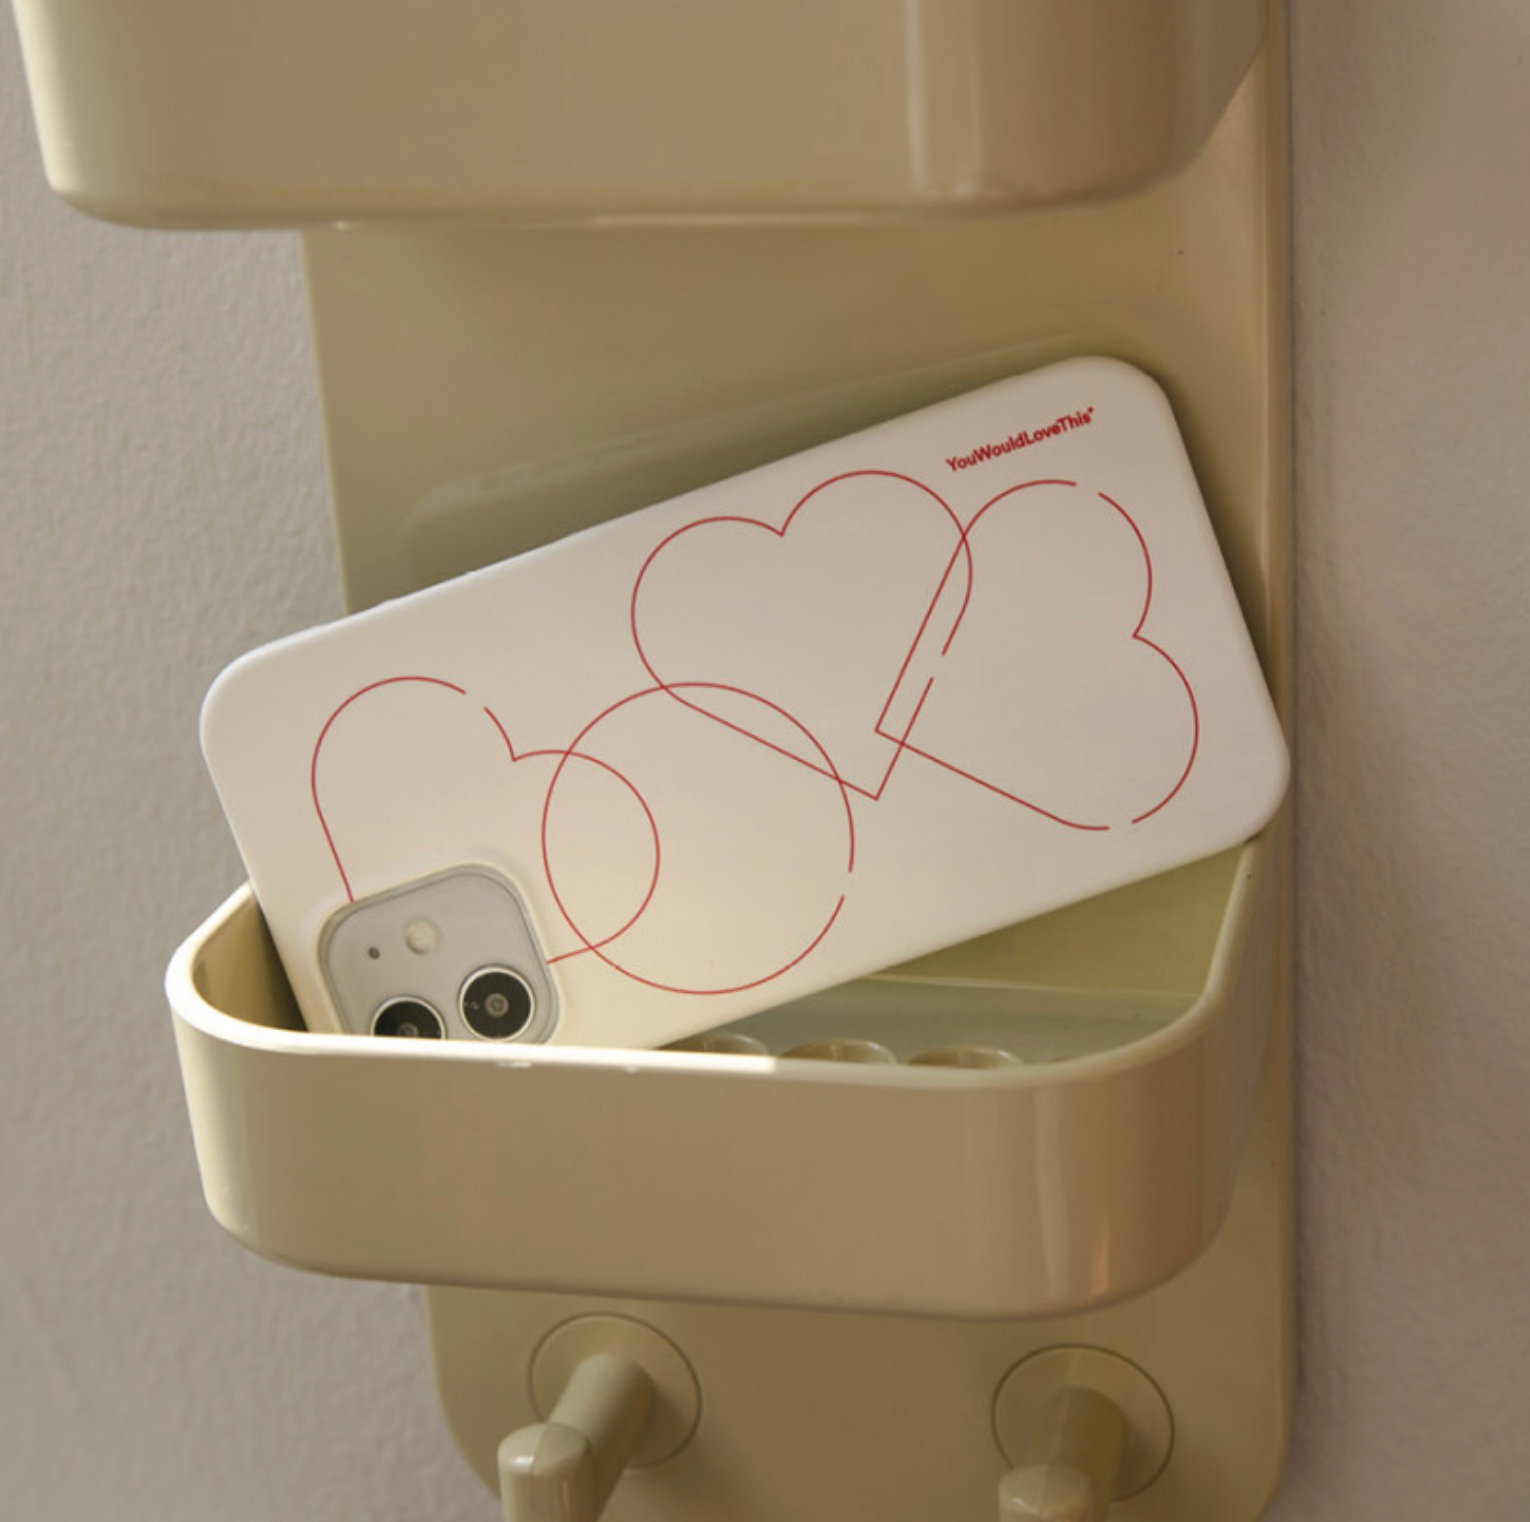 [YouWouldLoveThis] Love Diagram Hard Phone Case